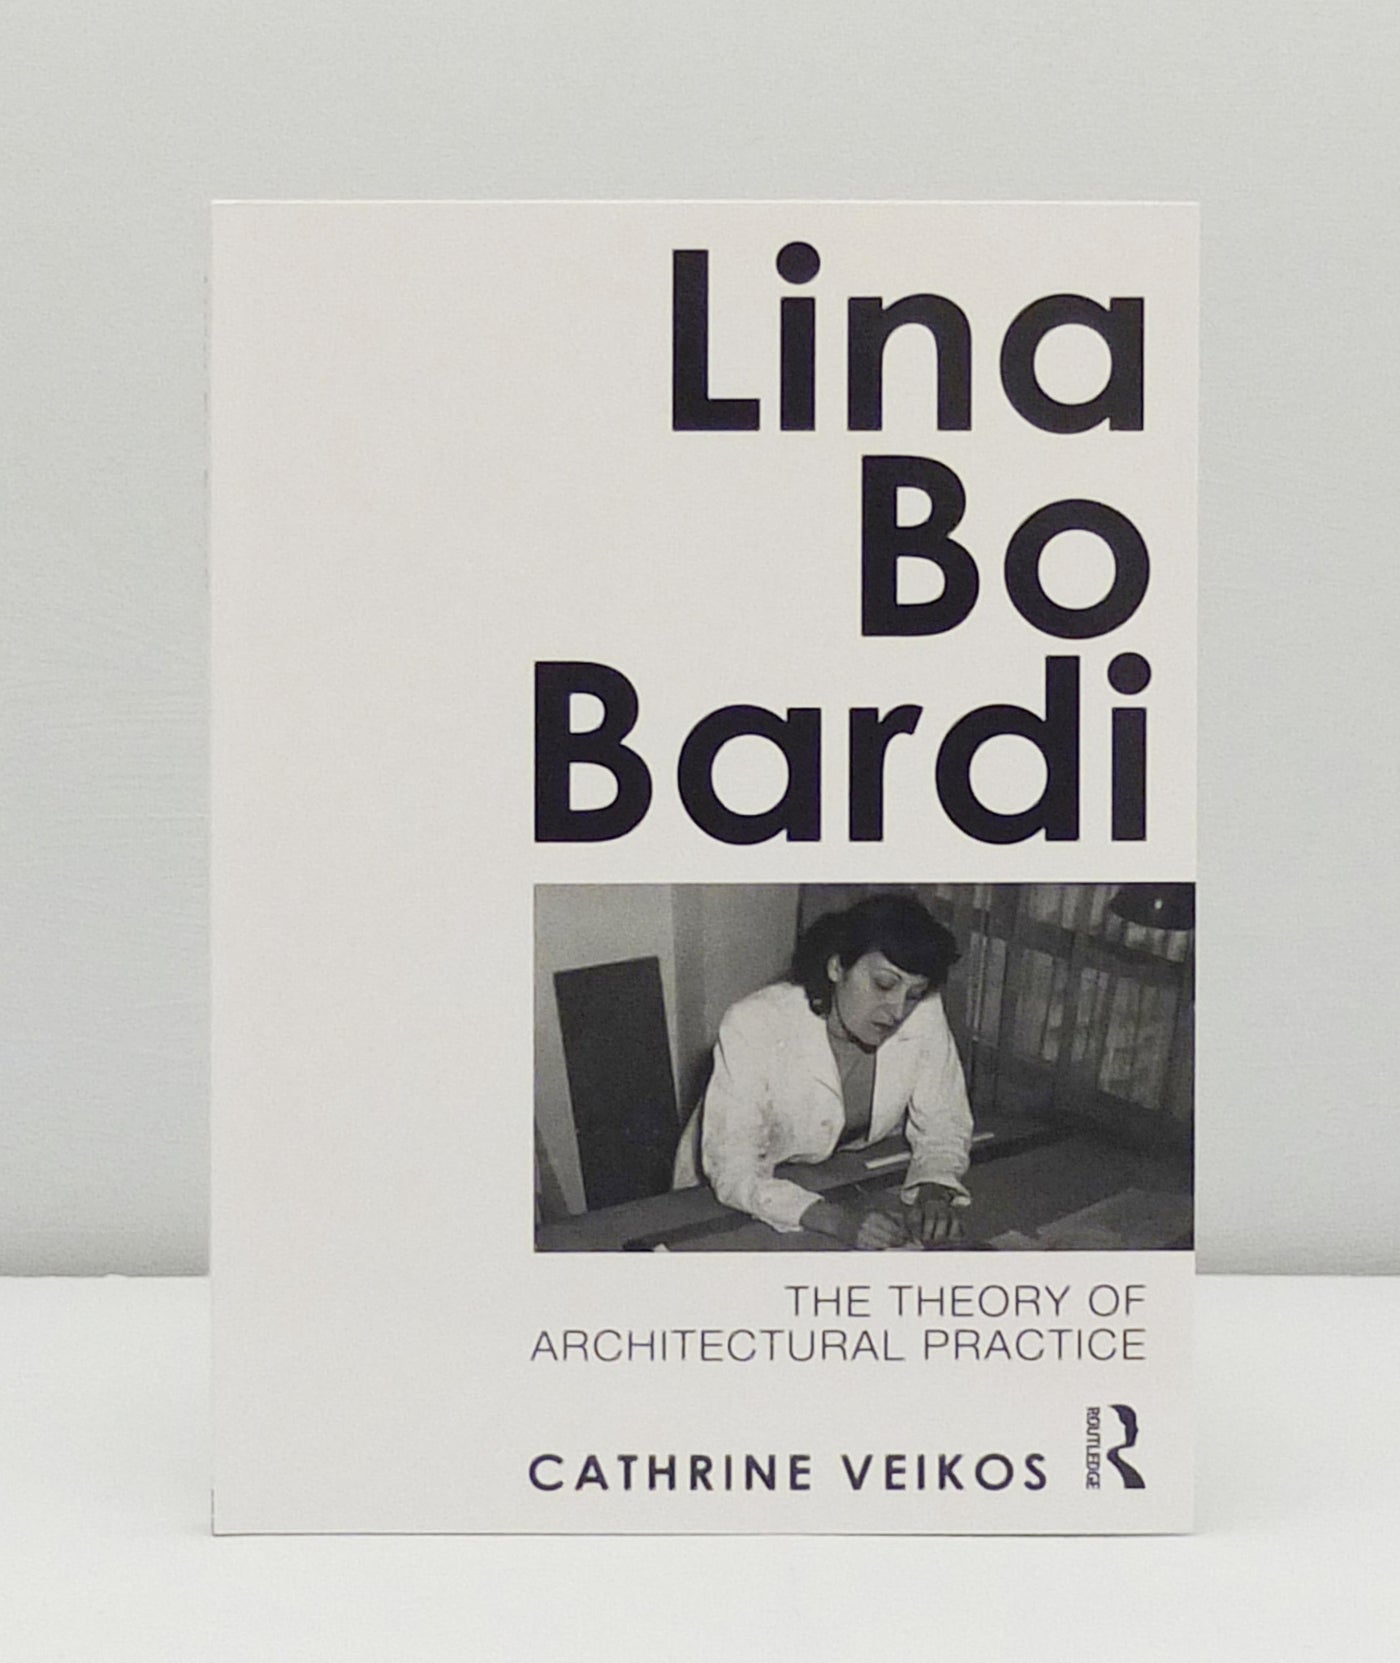 Lina Bo Bardi: The Theory of Architectural Practice by Cathrine Veikos}